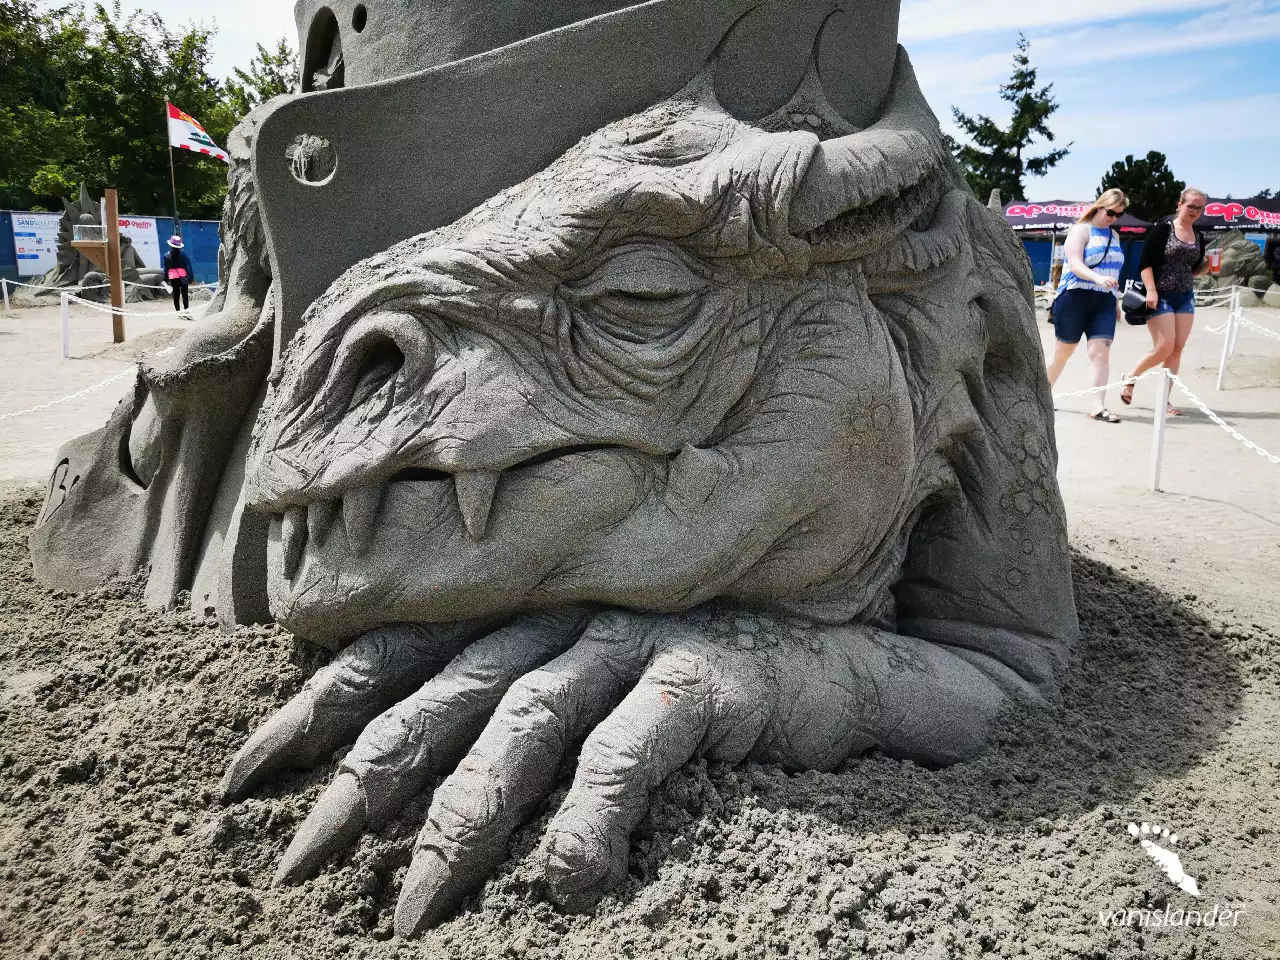 Sand statue of a sleeping dragon - Parksville Festival, Vancouver Island